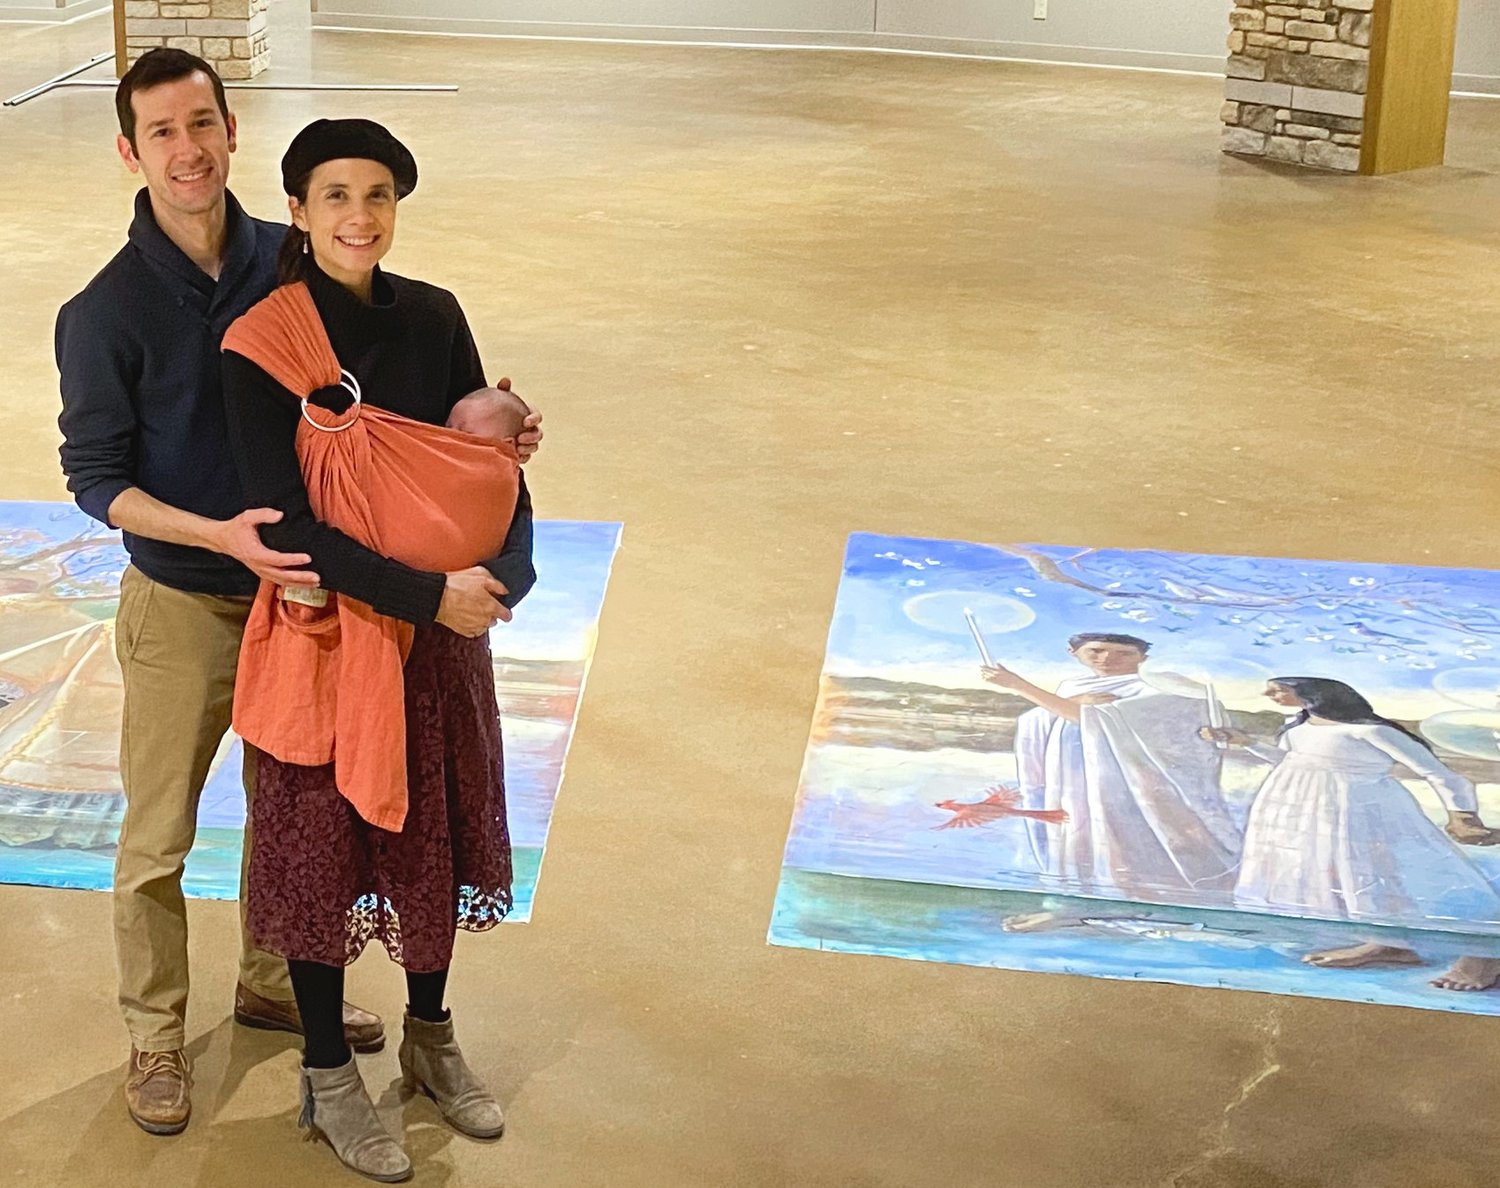 Andrew and Gwyneth Thompson-Briggs hold their son near the soon-to-be-installed murals Mrs. Thompson-Briggs painted for the new baptistery of the Cathedral of St. Joseph in Jefferson City, which is undergoing substantial renovation, expansion and renewal.